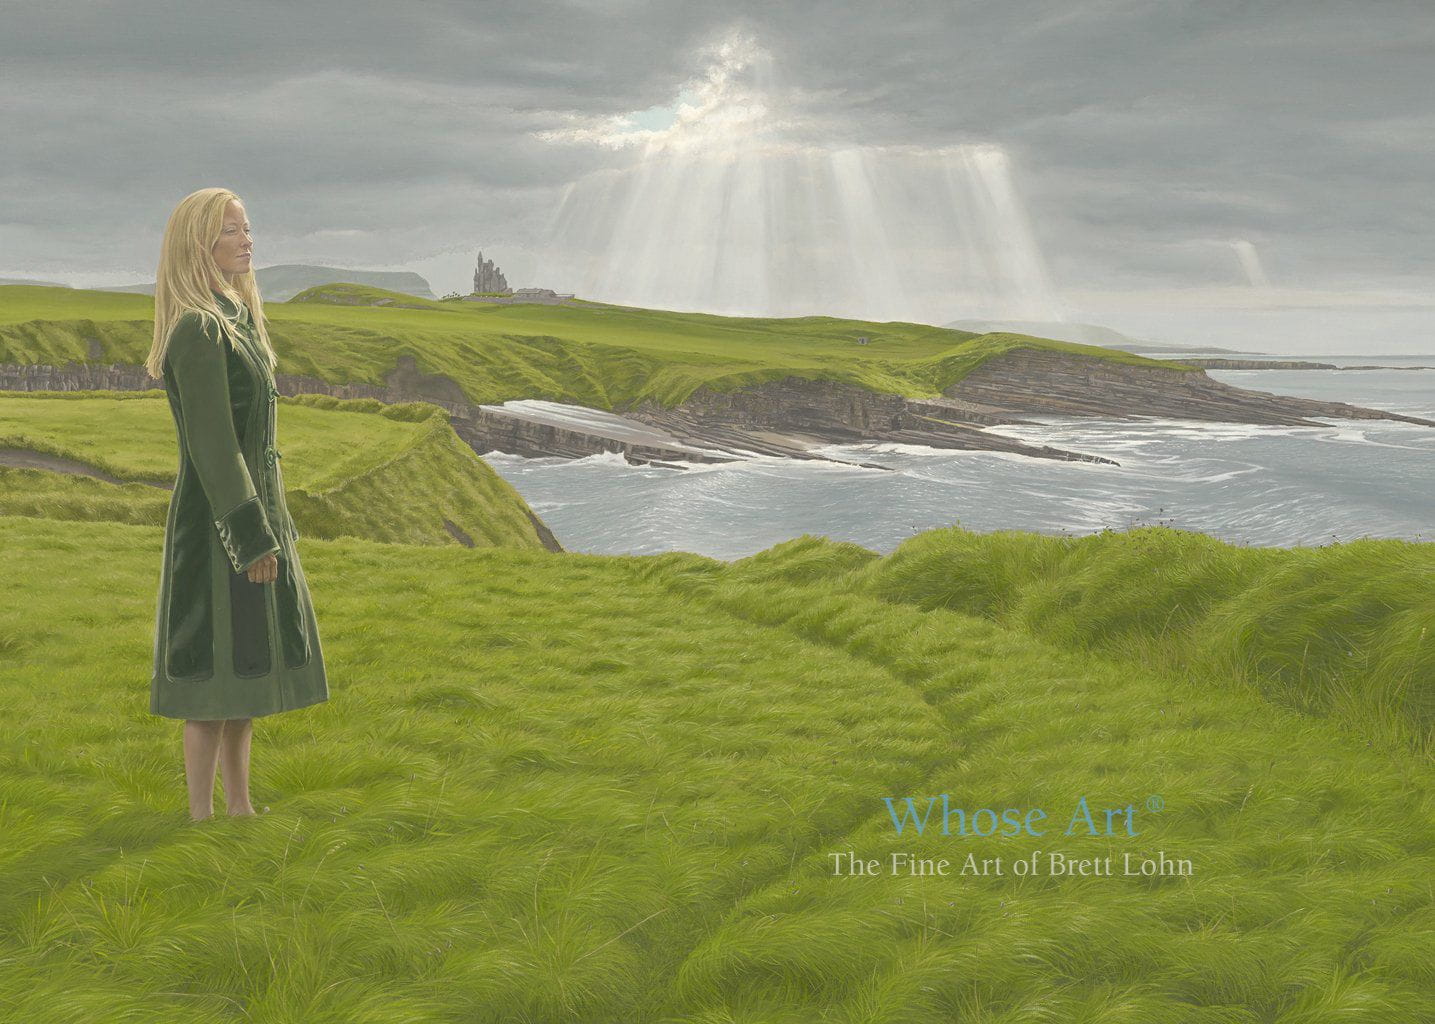 Irish art greeting card of a lady standing in a green coat on a grassy cliff in Mullaghmore, Sligo near ClassieBawn Castle.